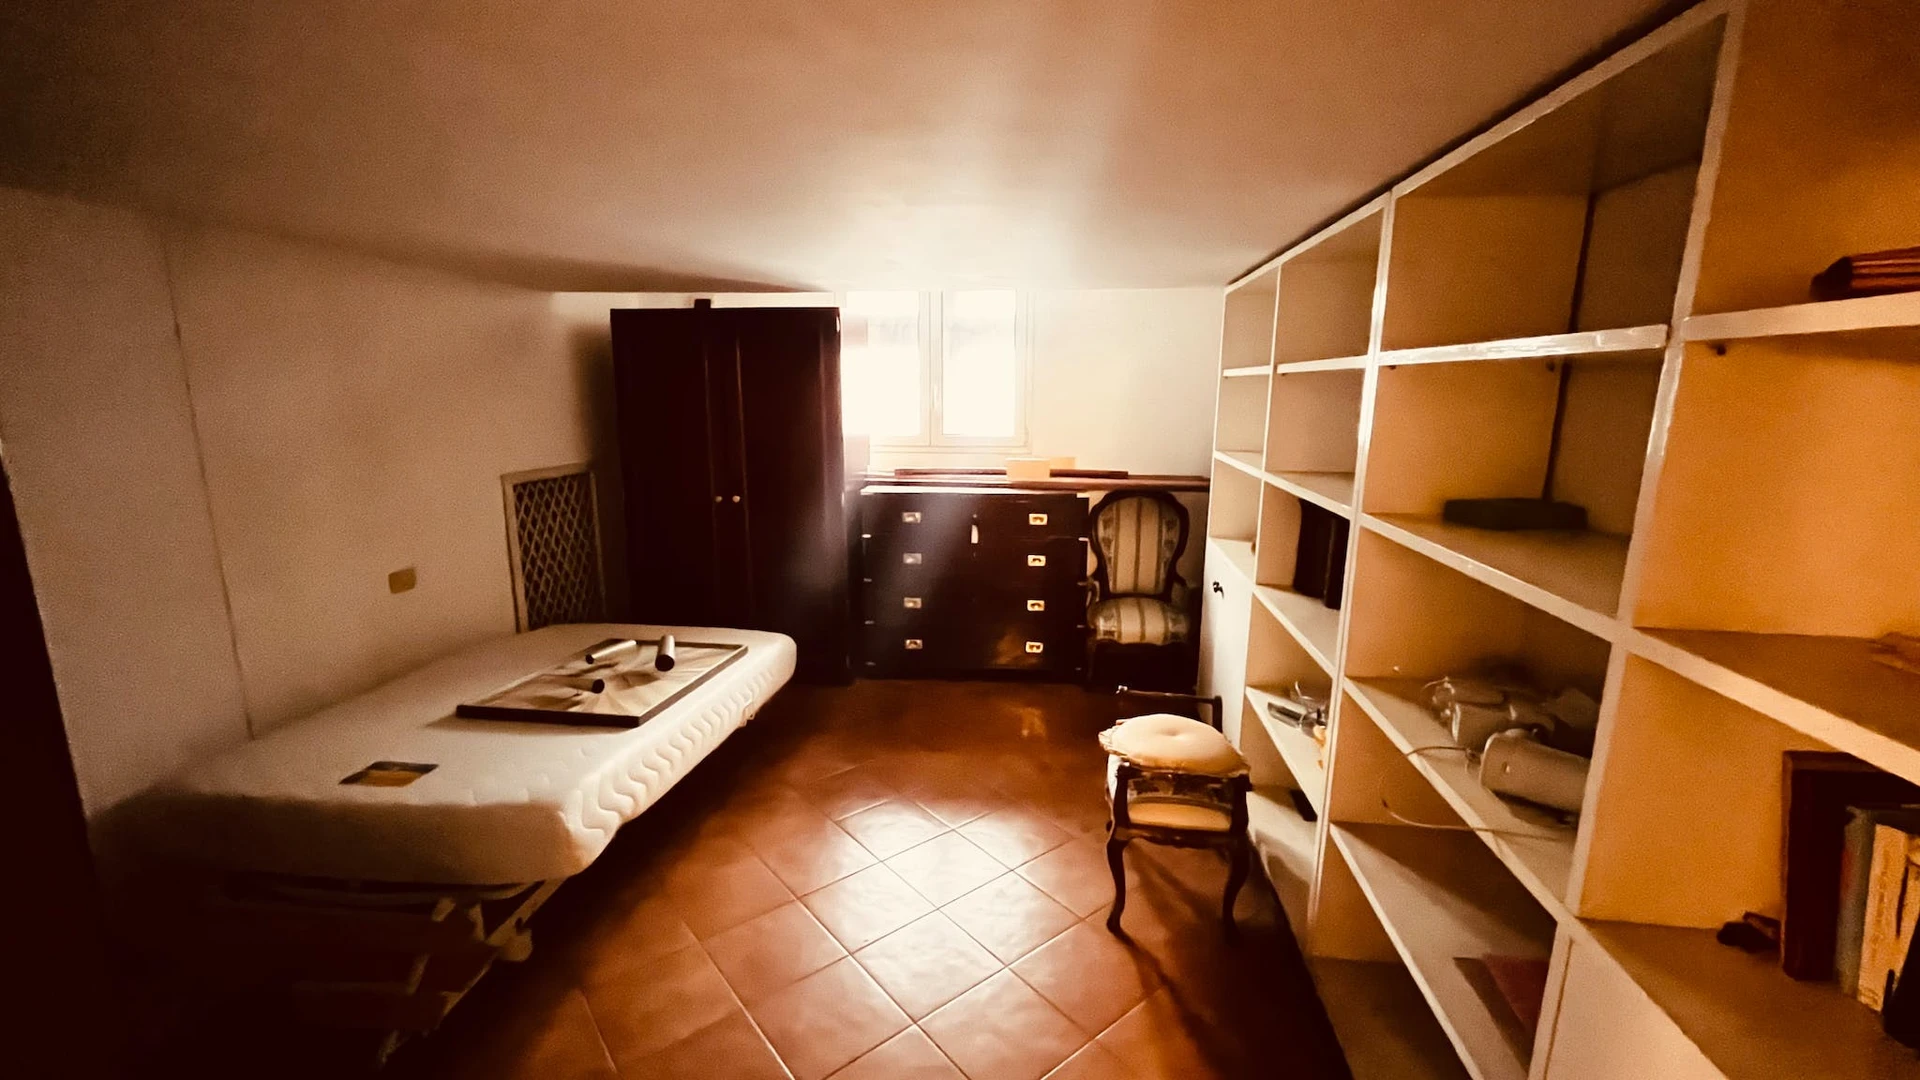 Shared room with another student in roma